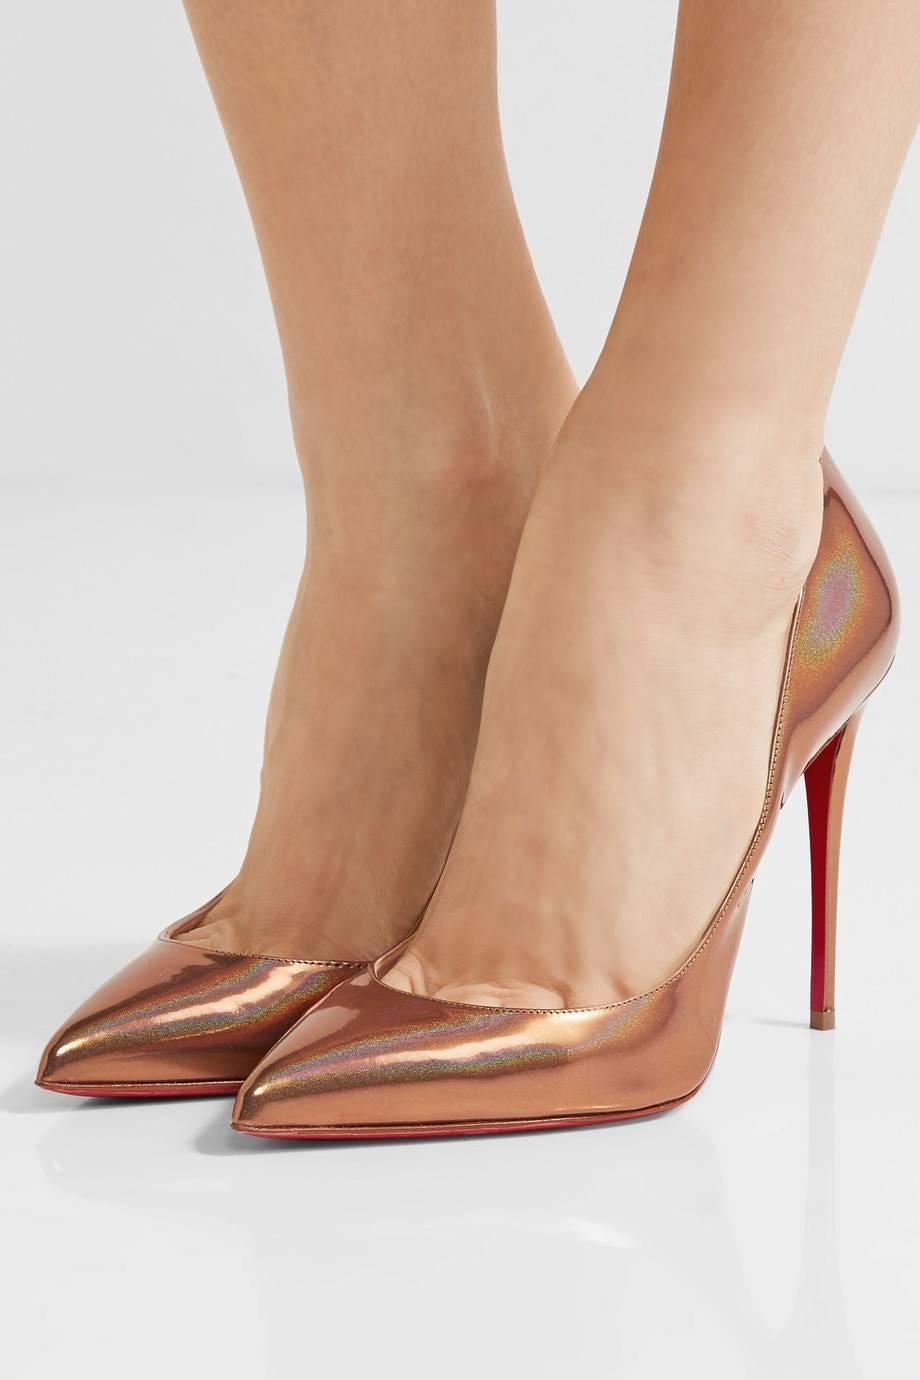 Christian Louboutin New Copper Leather Pigalle Follie High Heels Pumps in Box

Size IT 36
Leather
Slip on
Made in Italy
Heel height 4.3